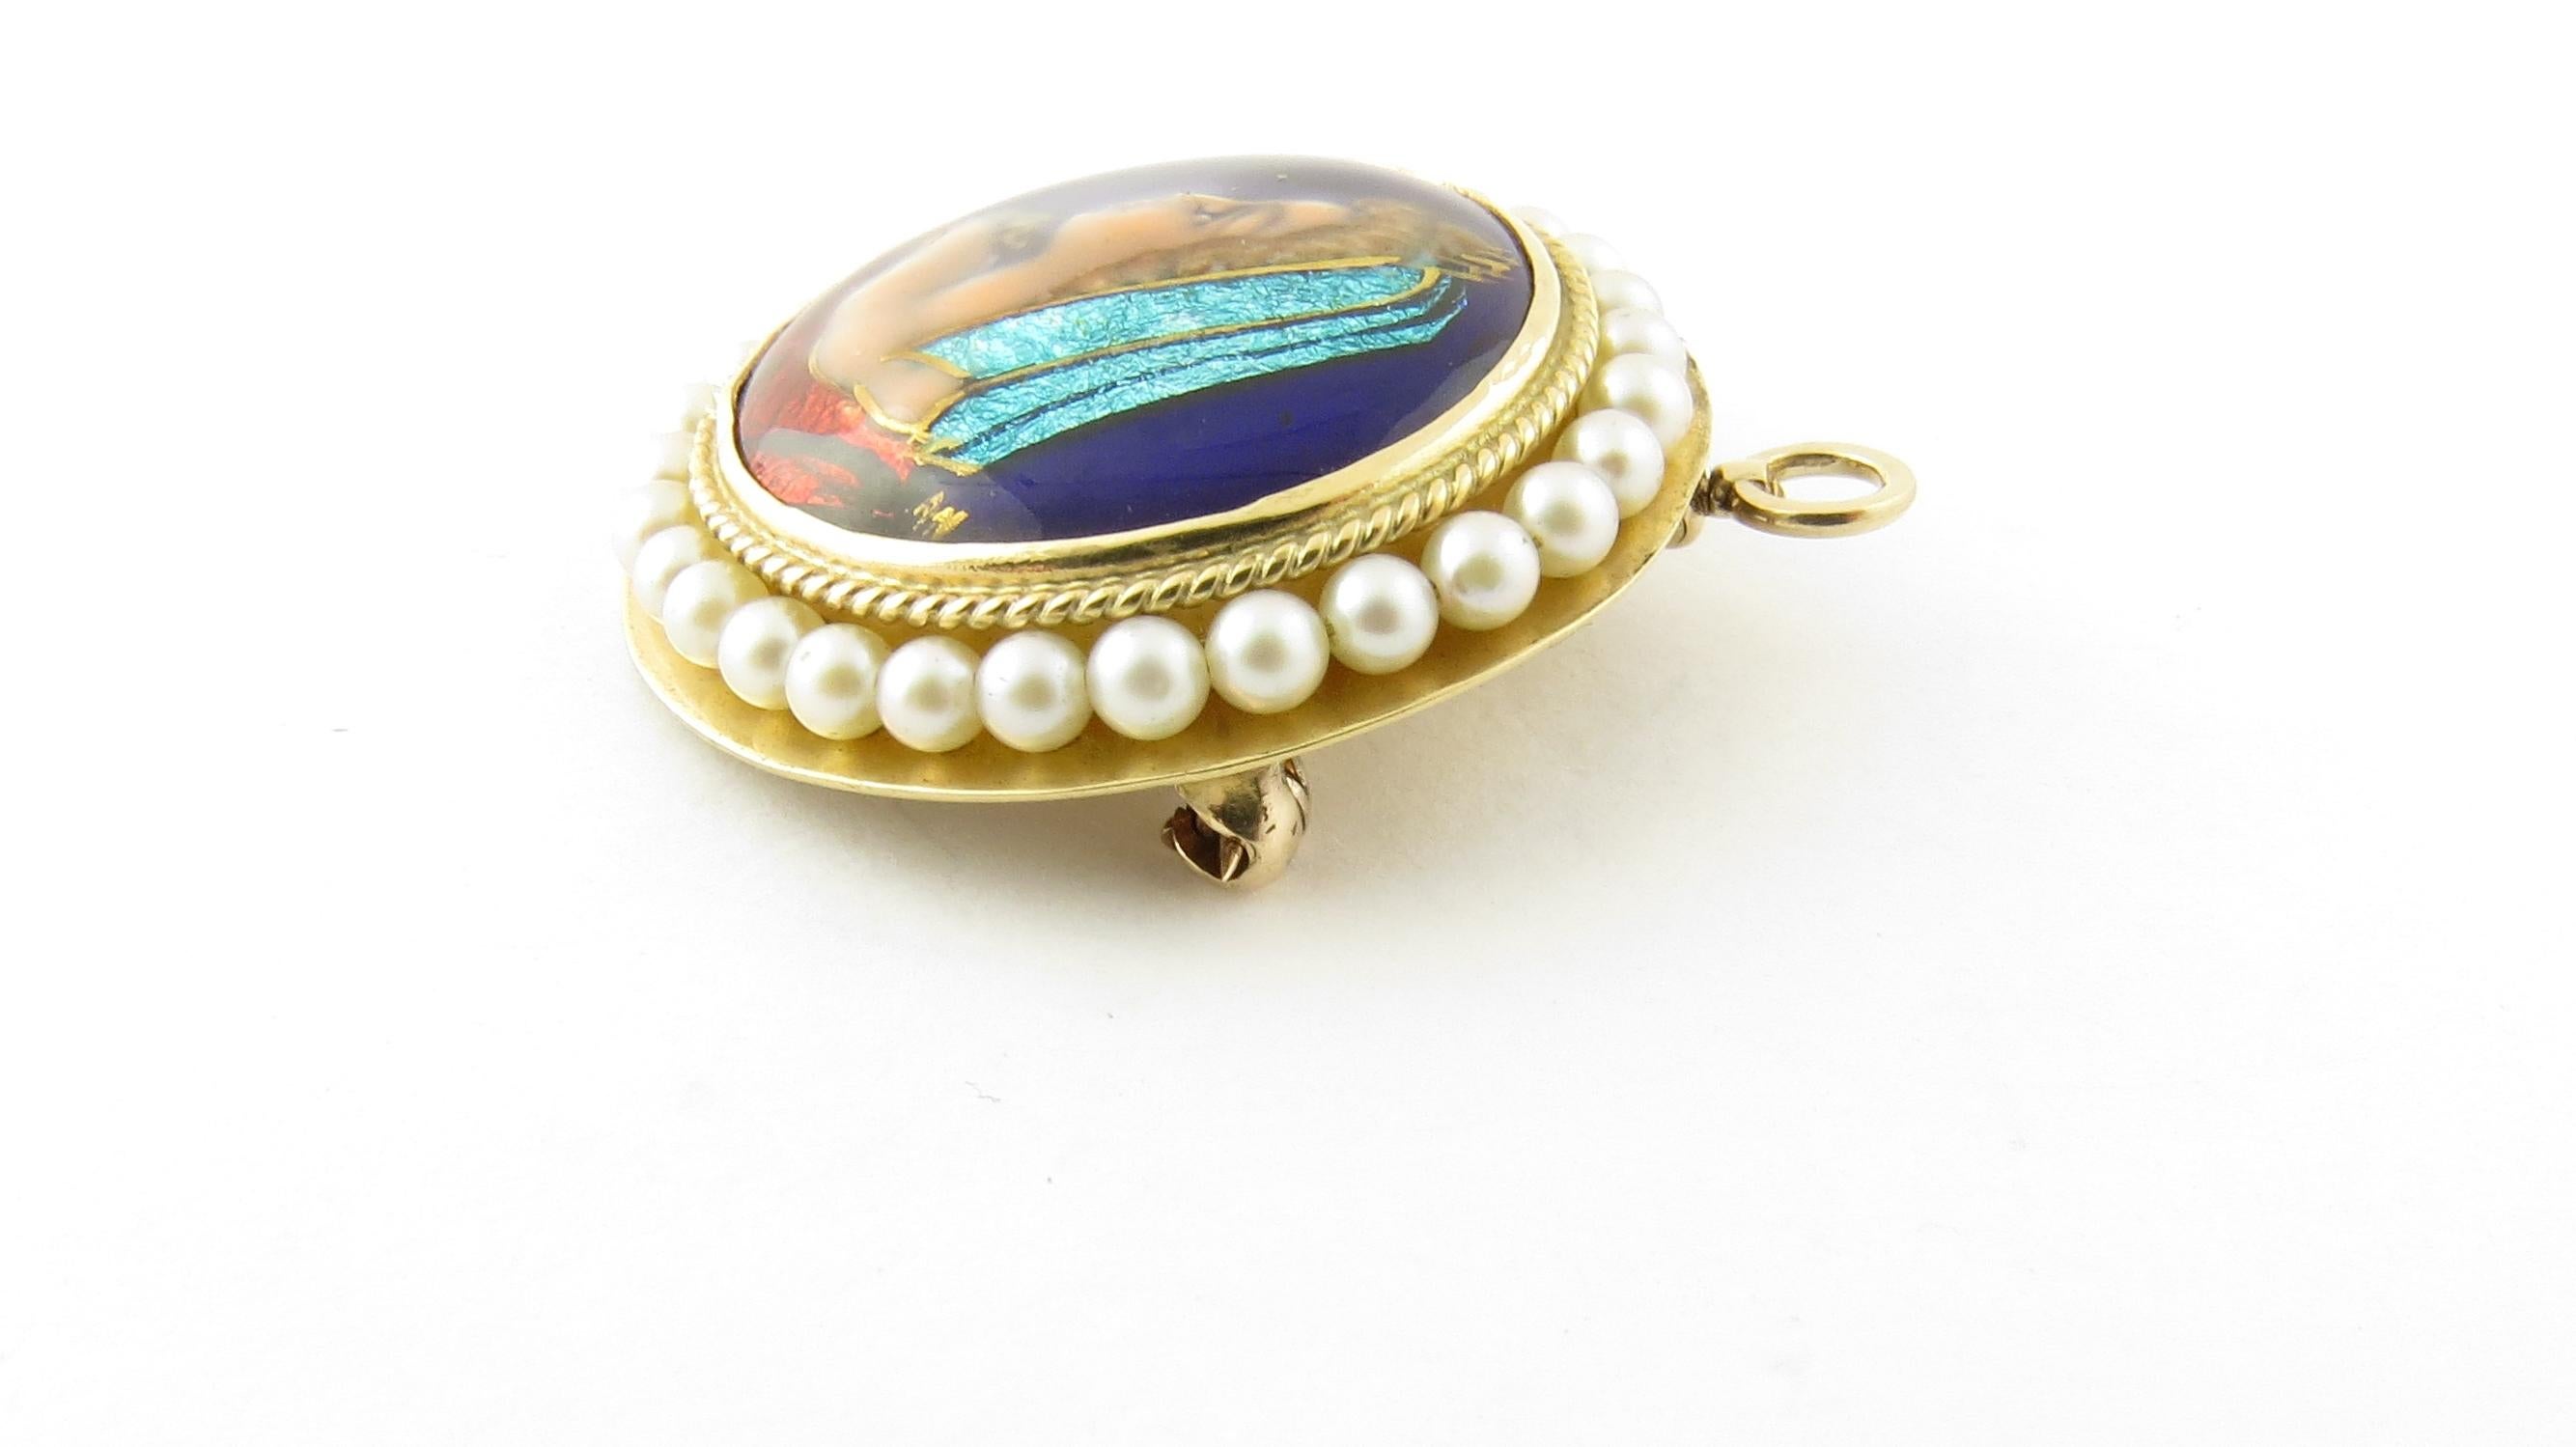 Vintage 14 Karat Yellow Gold and Seed Pearl Painted Cameo Pendant/Brooch

This lovely painted cameo features a lovely lady in profile surrounded by 30 seed pearls and set in classic 14K yellow gold. 
Can be worn as a brooch or a pendant.

Size: 27